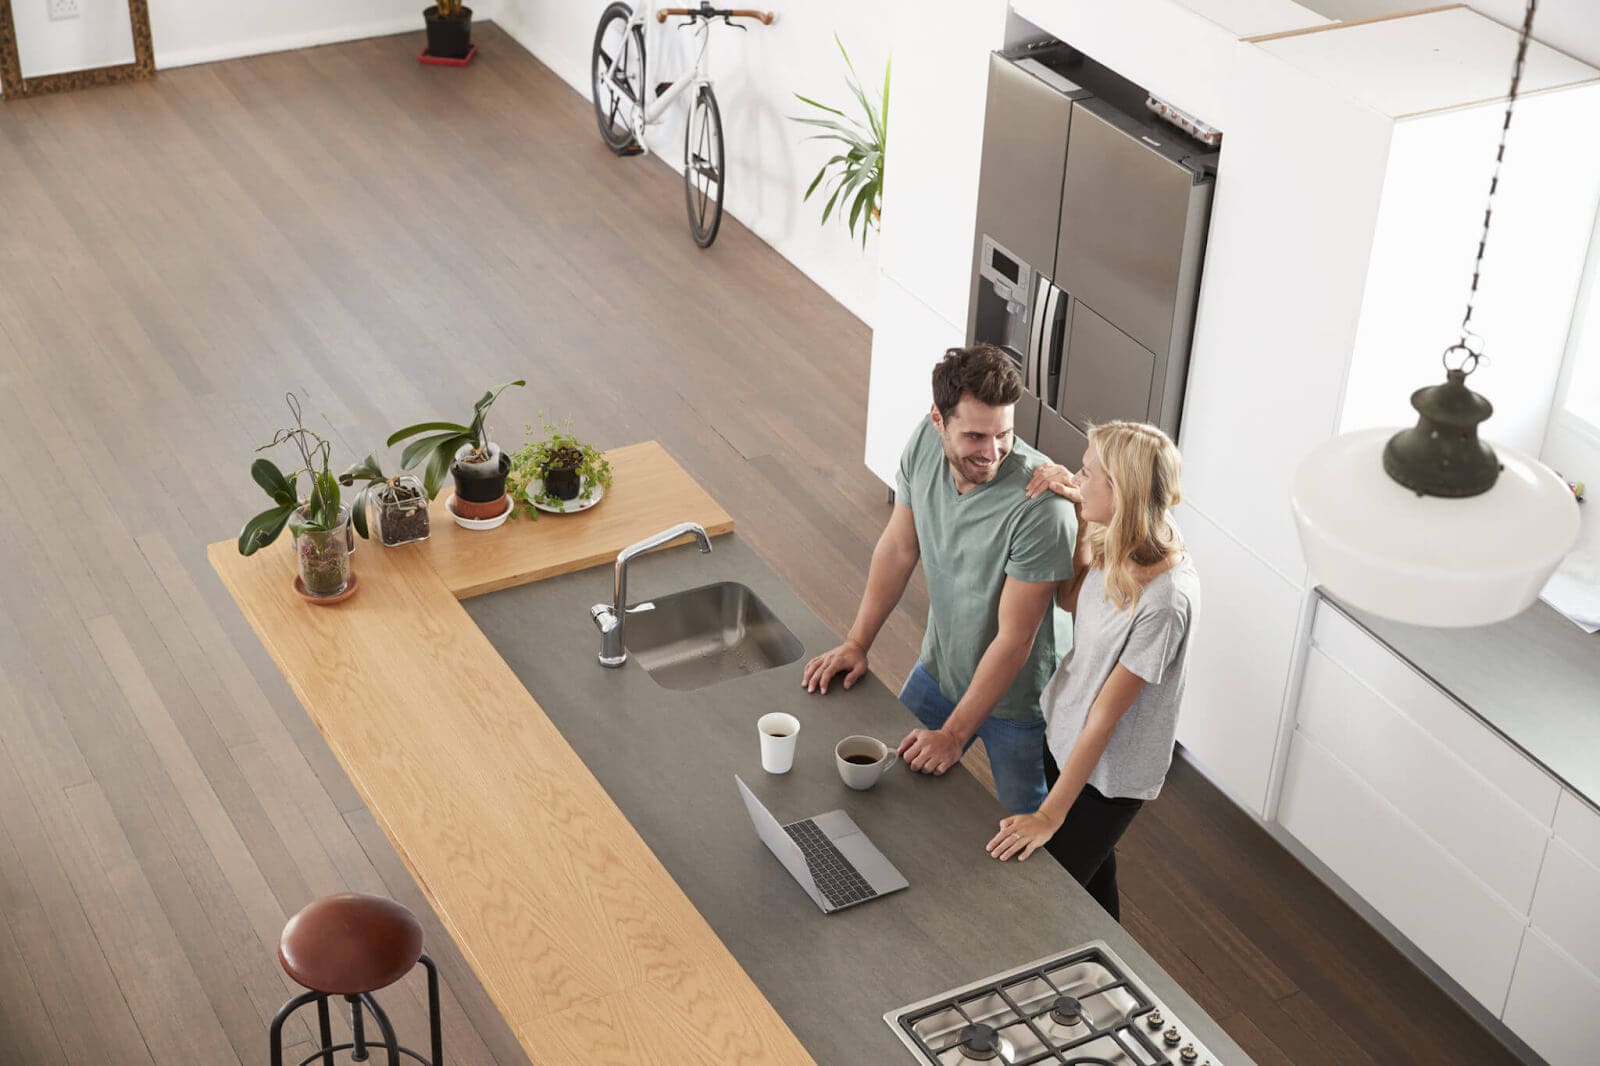 Couple smiling and talking in kitchen island